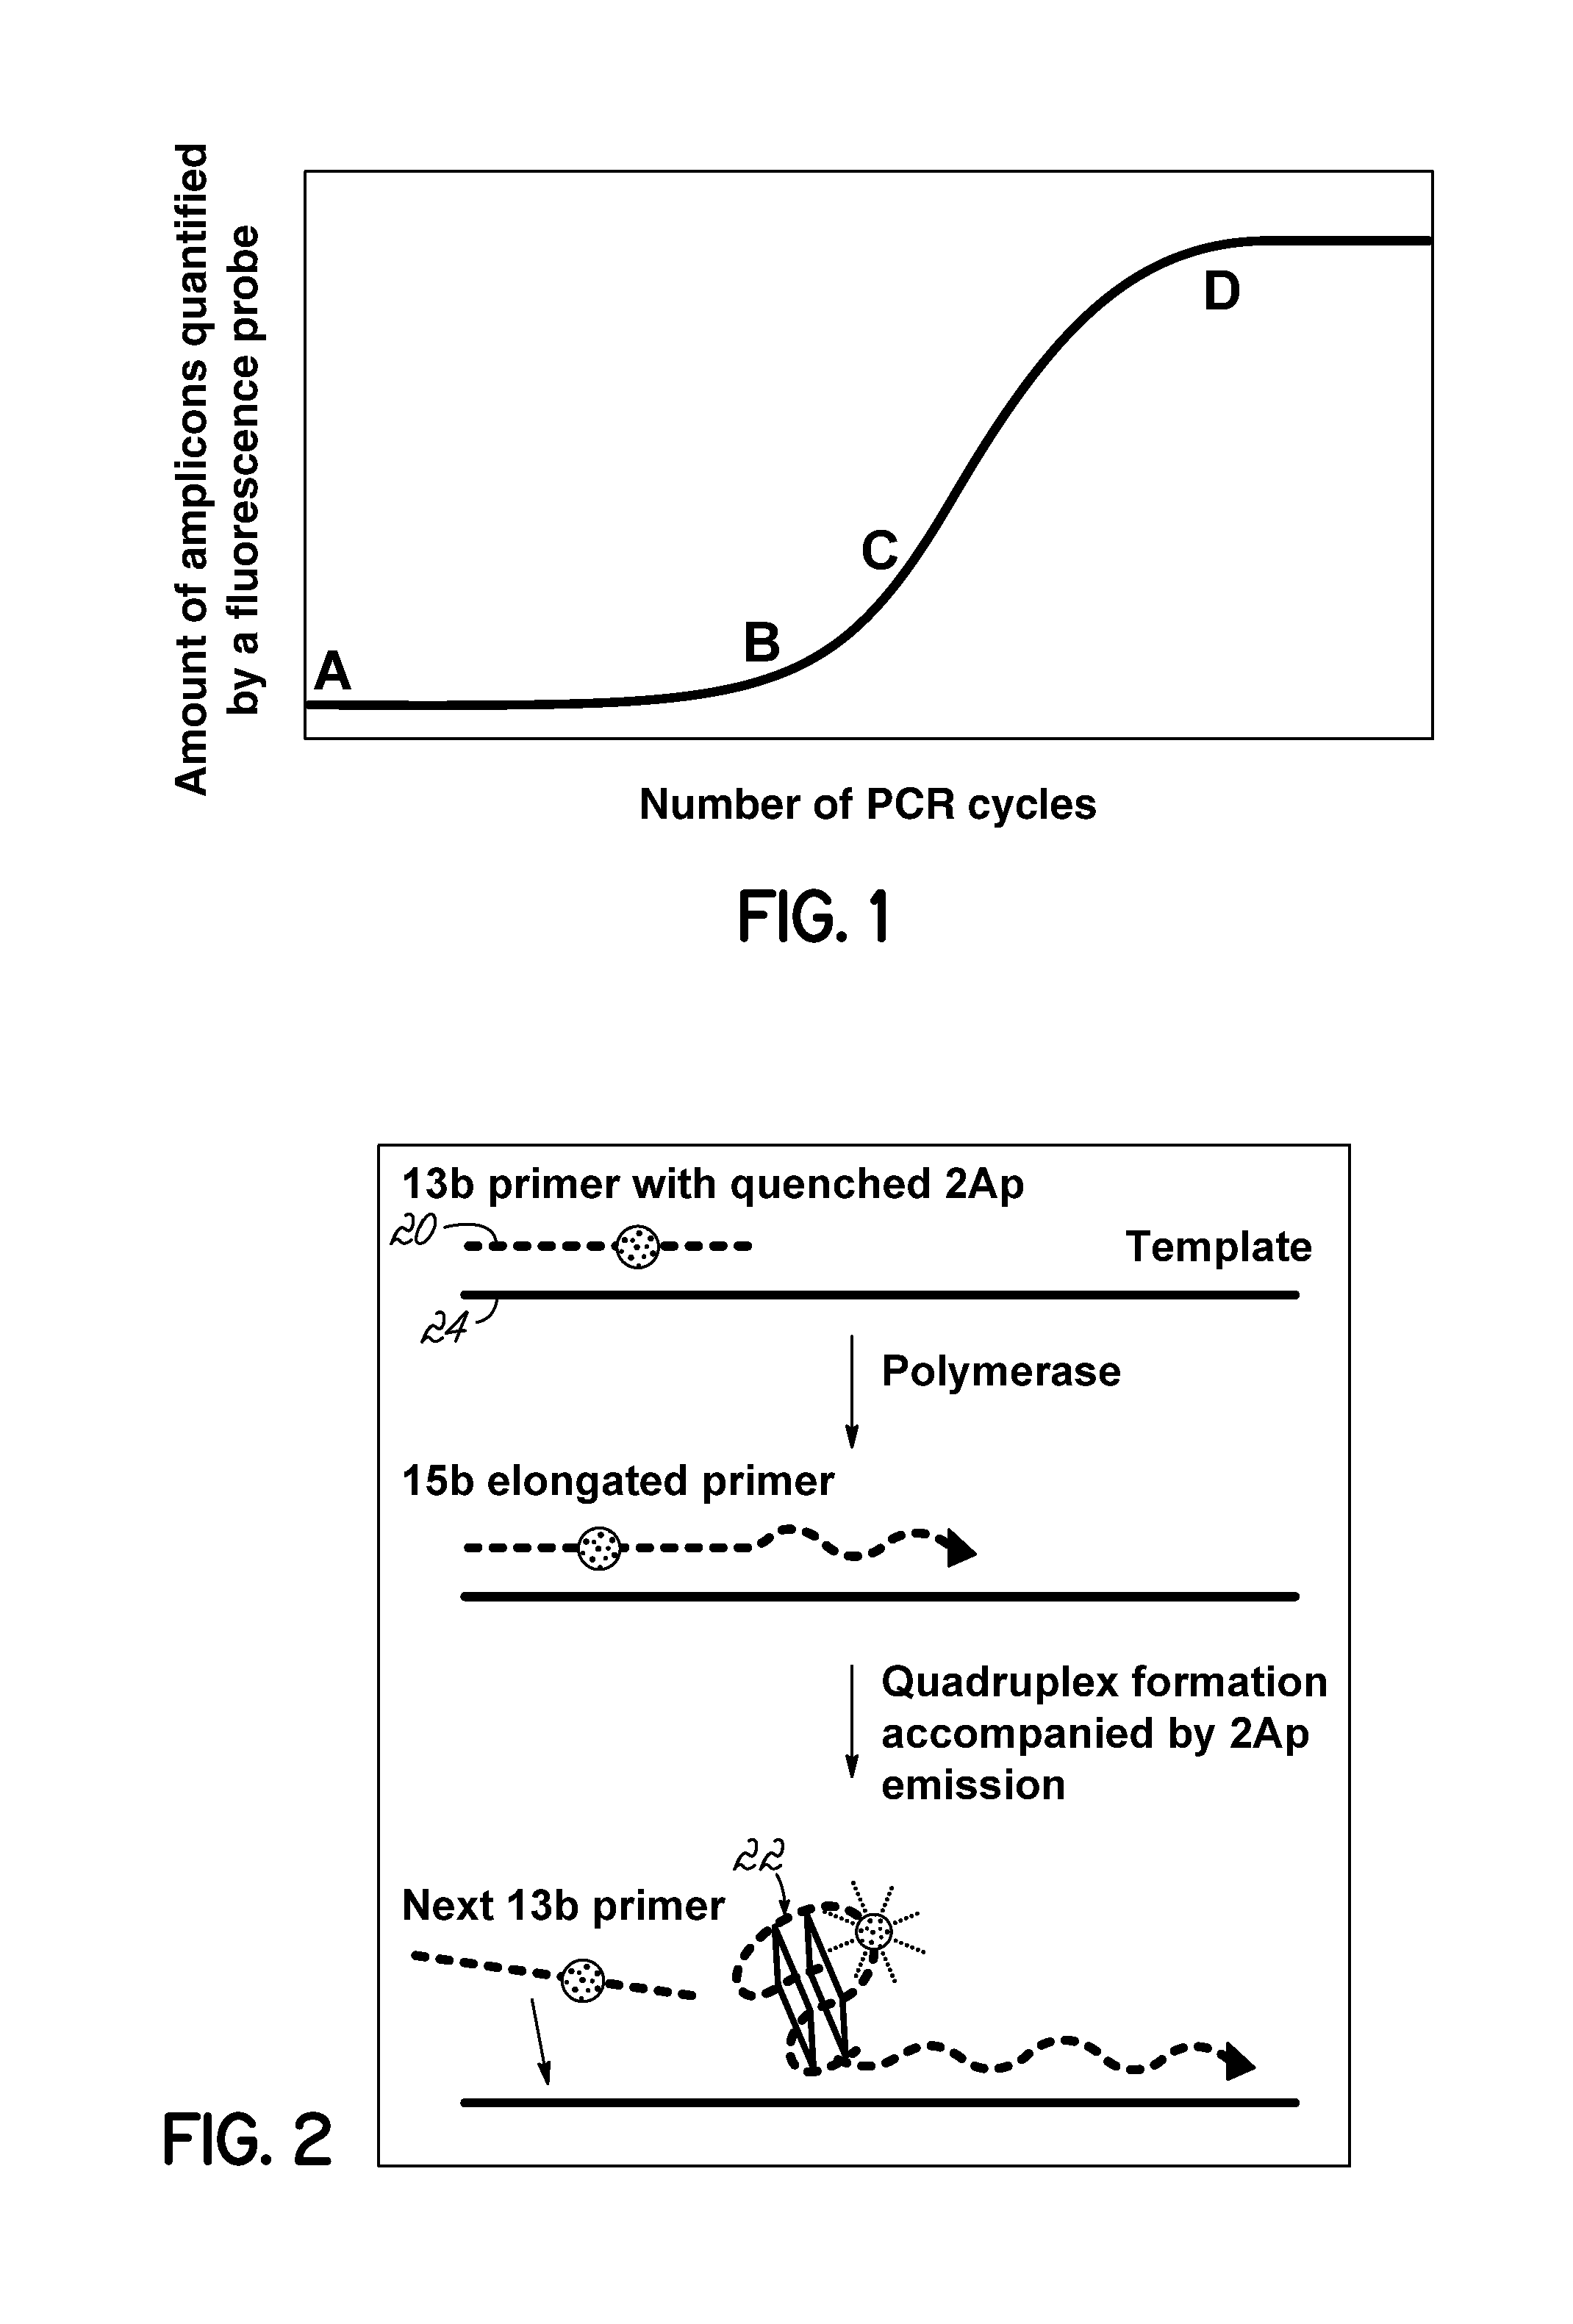 Isothermal Amplification of Nucleic Acid